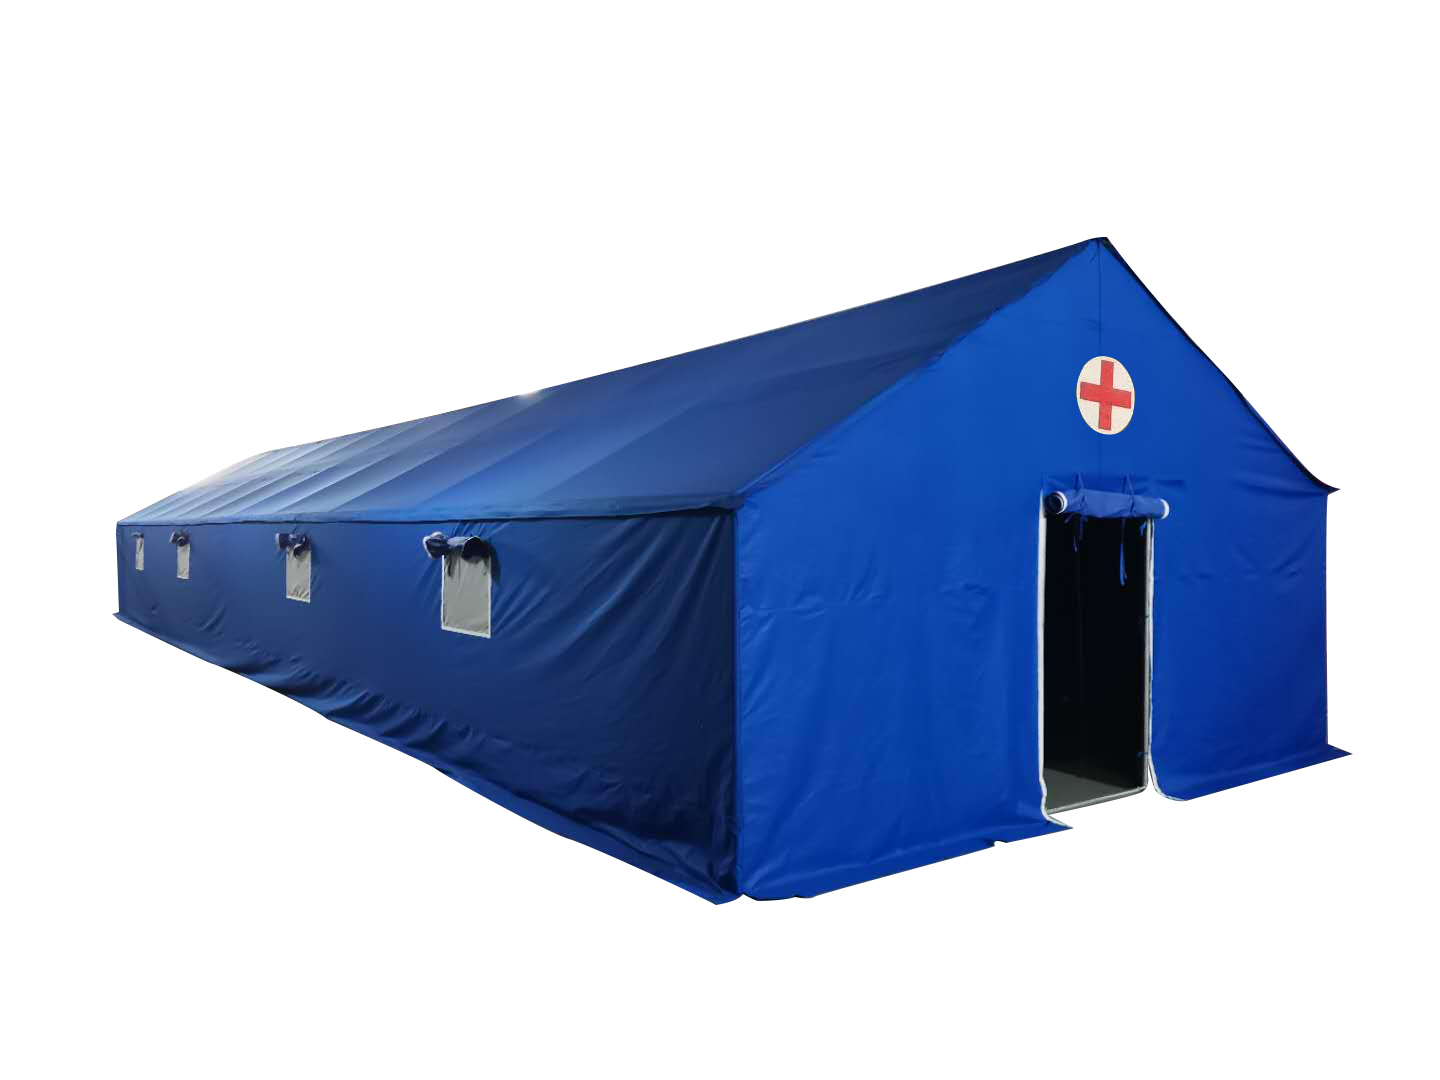 Factors to consider when choosing a hospital disaster relief tent